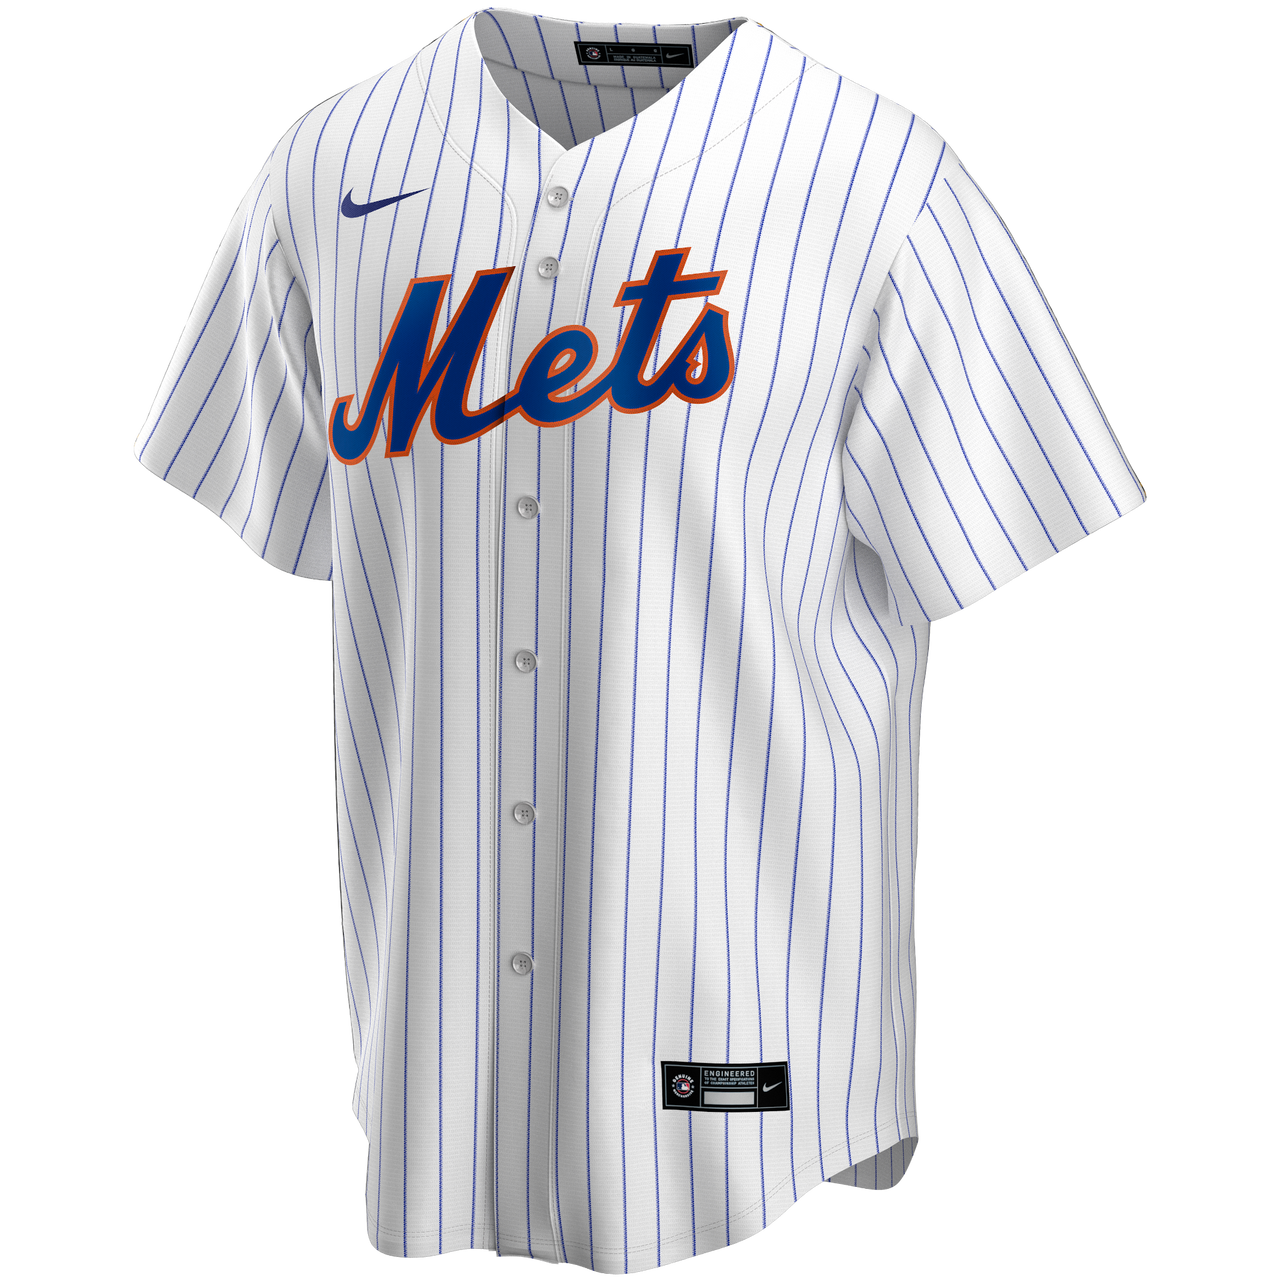 signed jacob degrom jersey